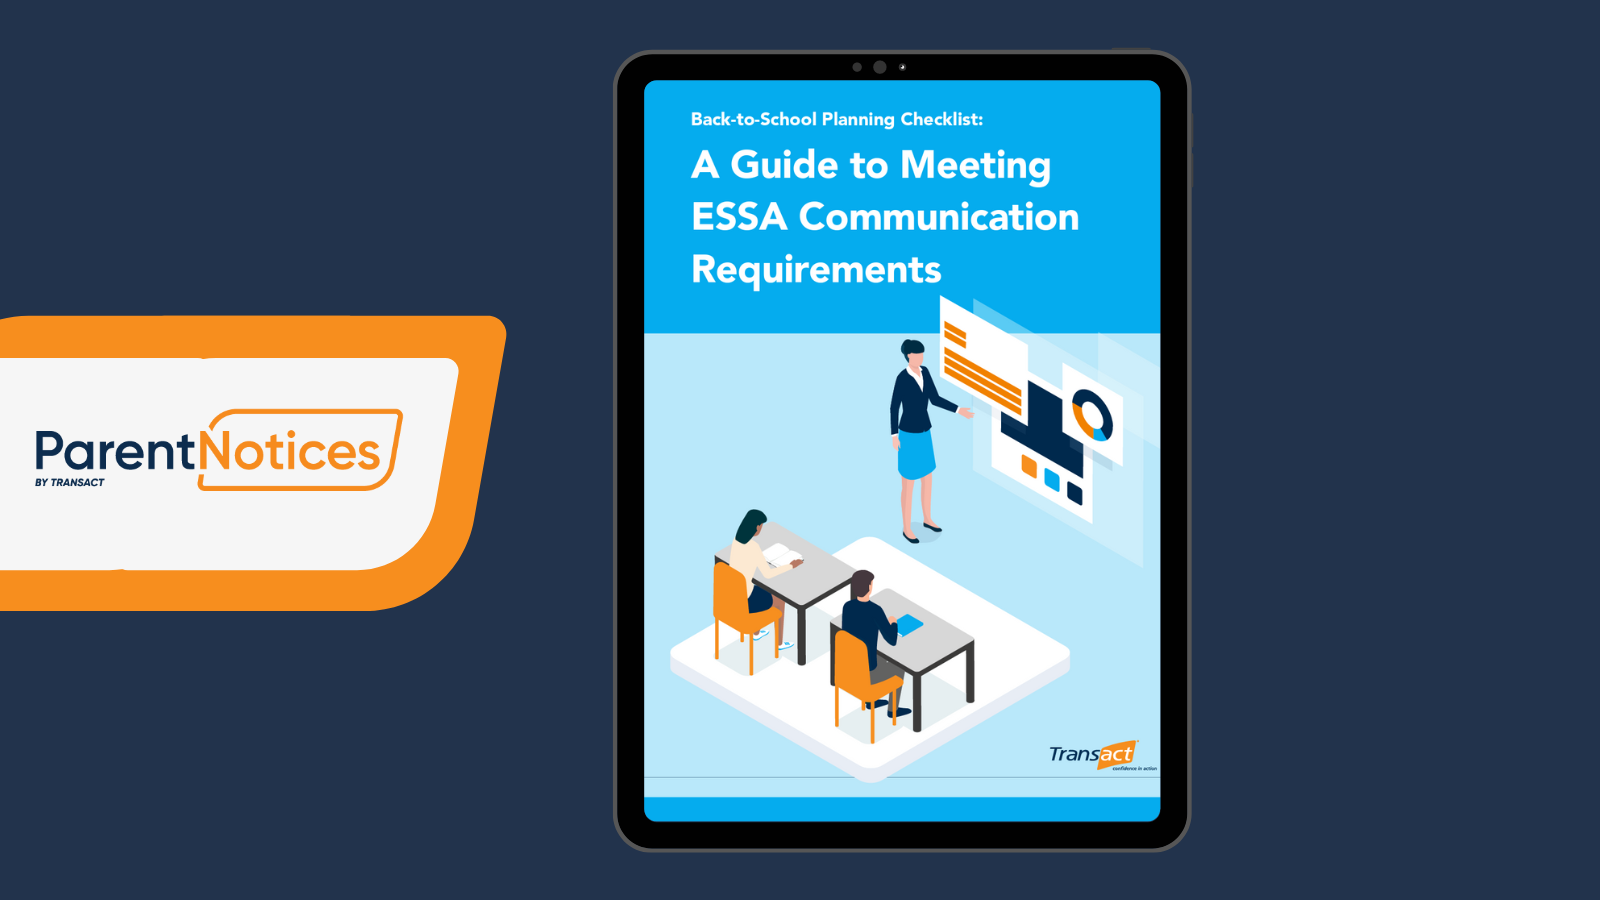 A Guide to Meeting ESSA Communication Requirements